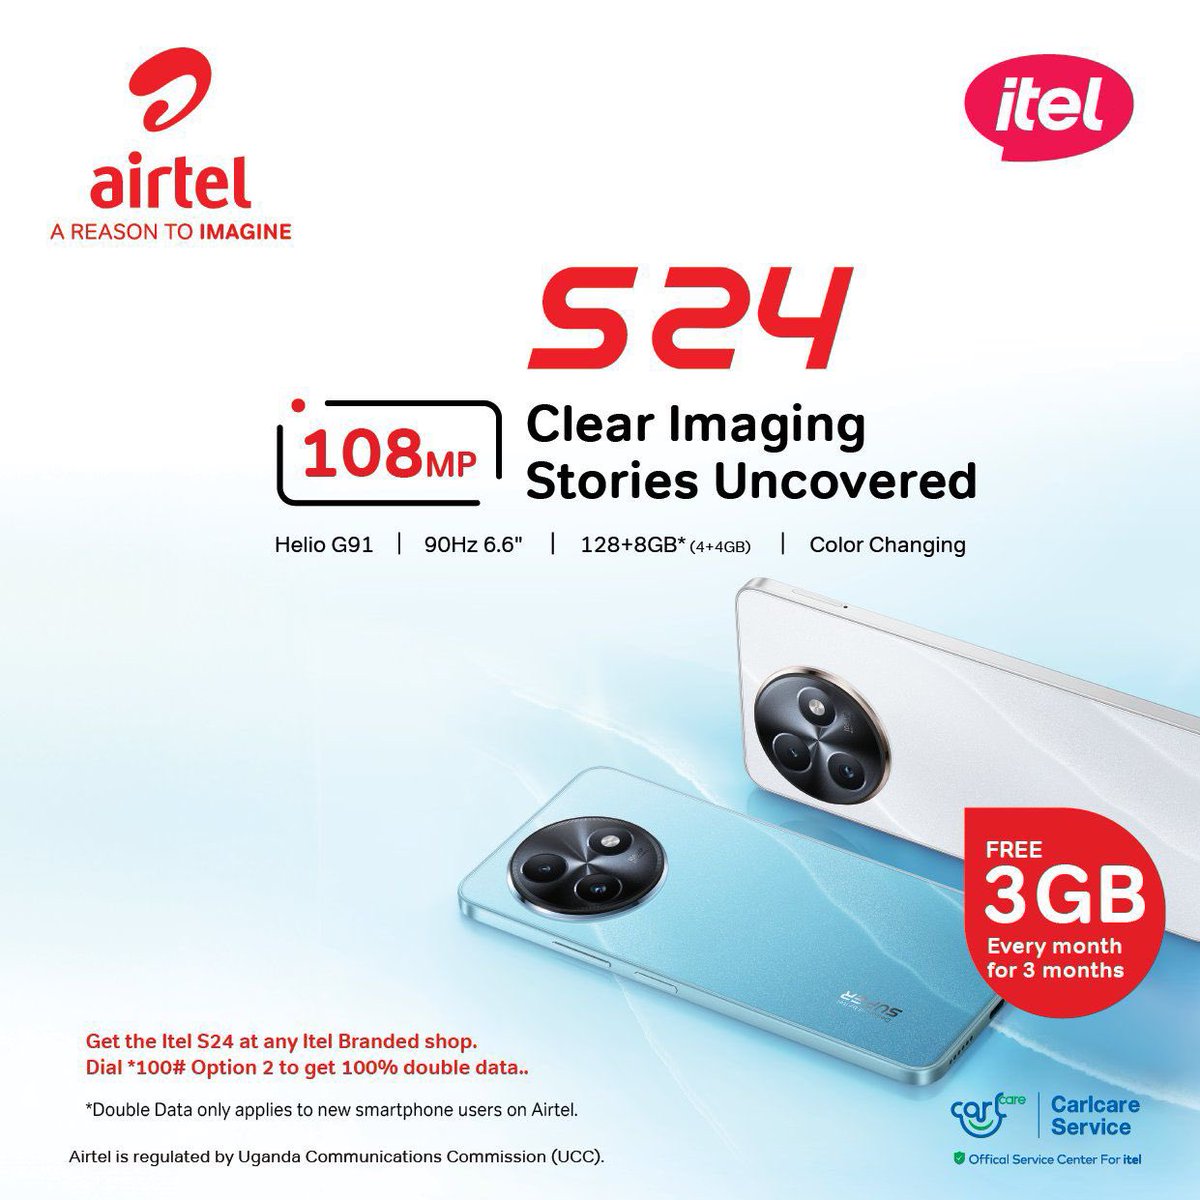 Free 3GB every month for 3 months as well as 100% double data from @Airtel_Ug awaits you when you purchase the #itelS24 Visit any @iteluganda store to purchase the phone and enjoy the benefits. #AirtelXItel